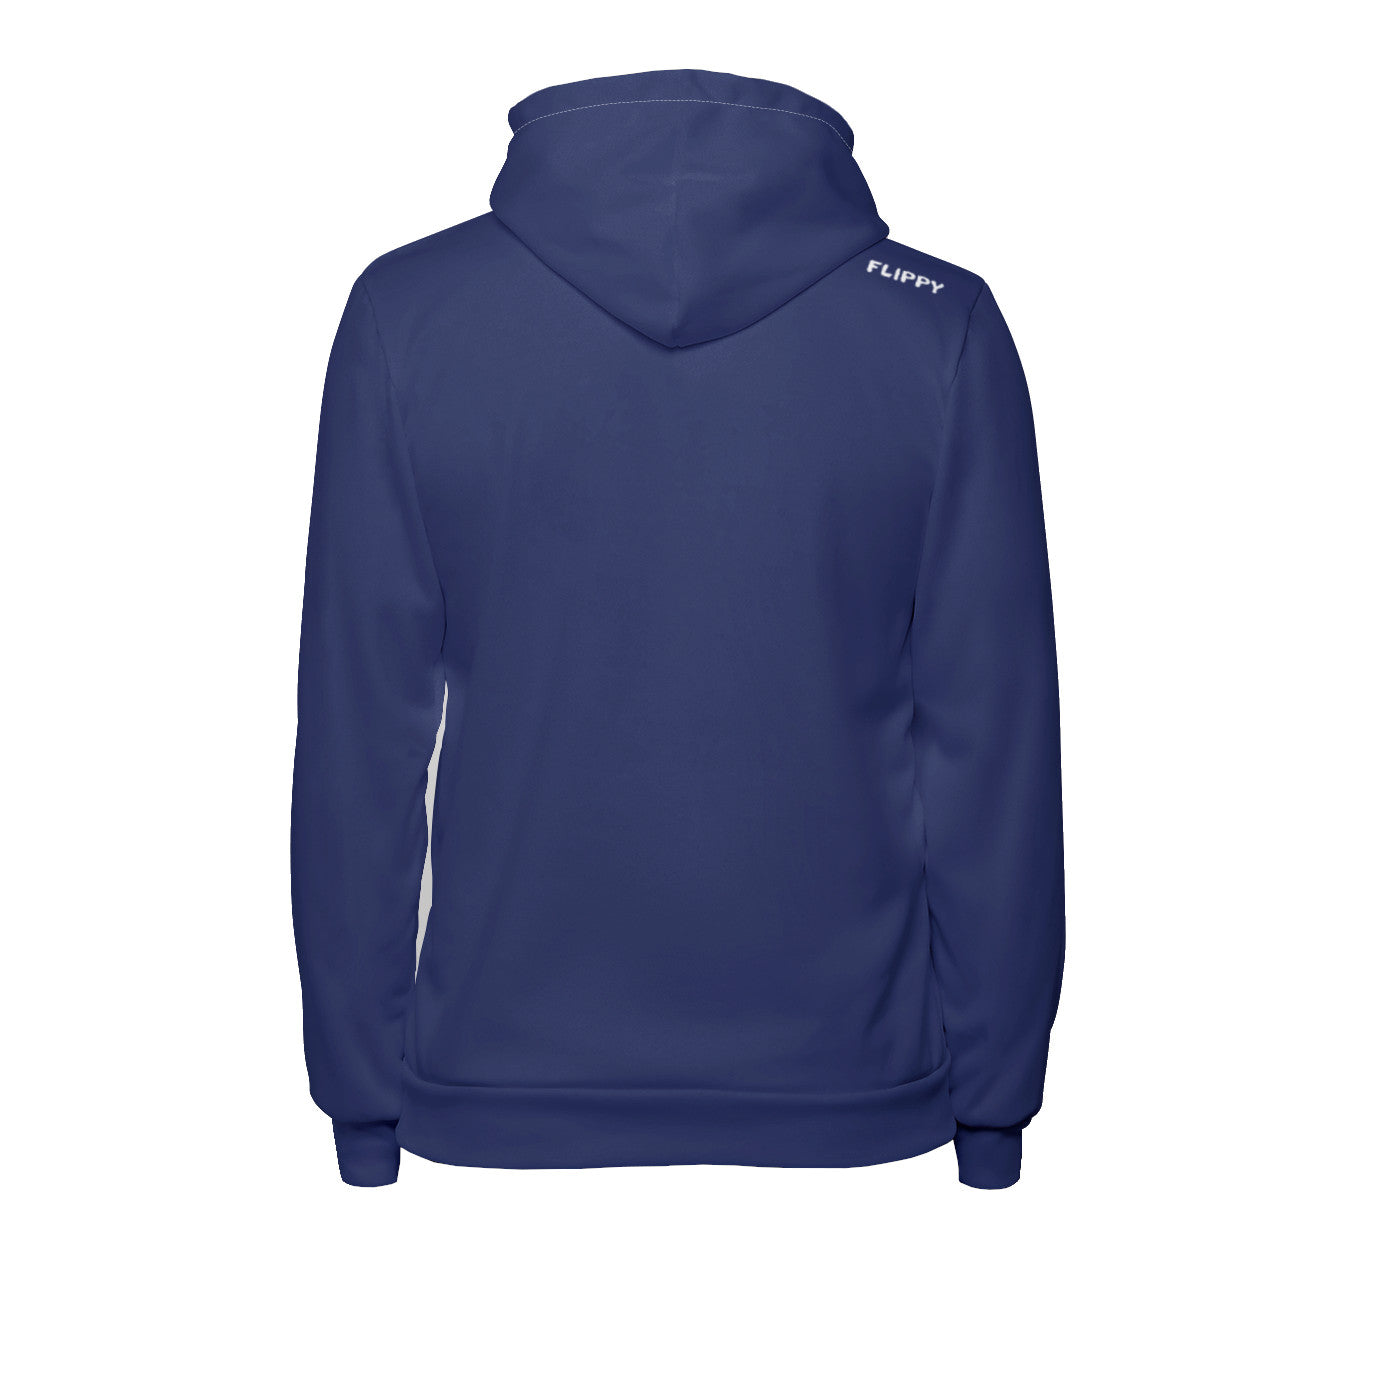 Foundation Navy Blue Pullover Hoodie